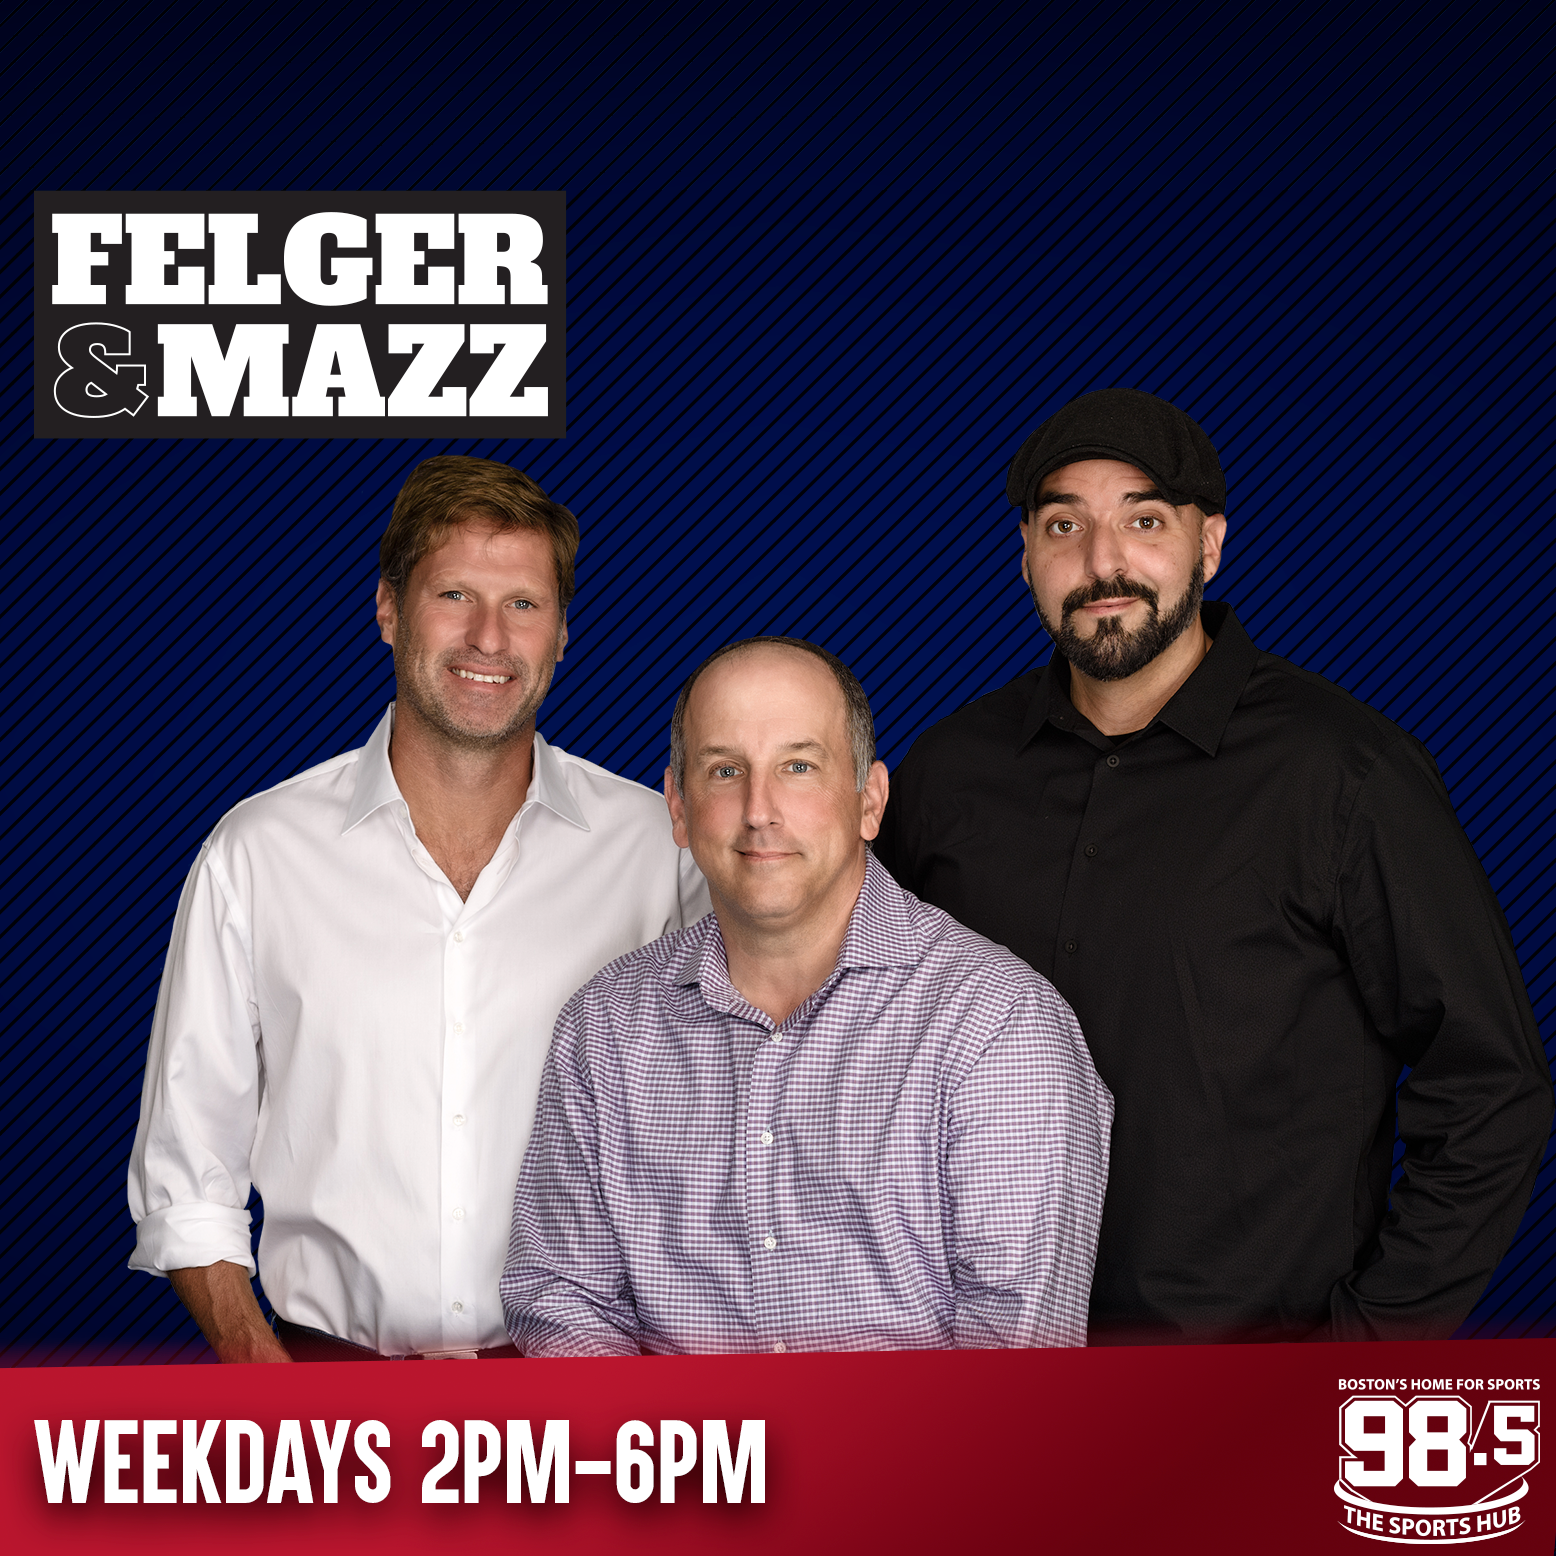 Patriots Locker Room Dynamic Is Changing // Thoughts On The Match // Felger and Mazz Big Board Picked N'Keal Harry- 7/7 (Hour 3)